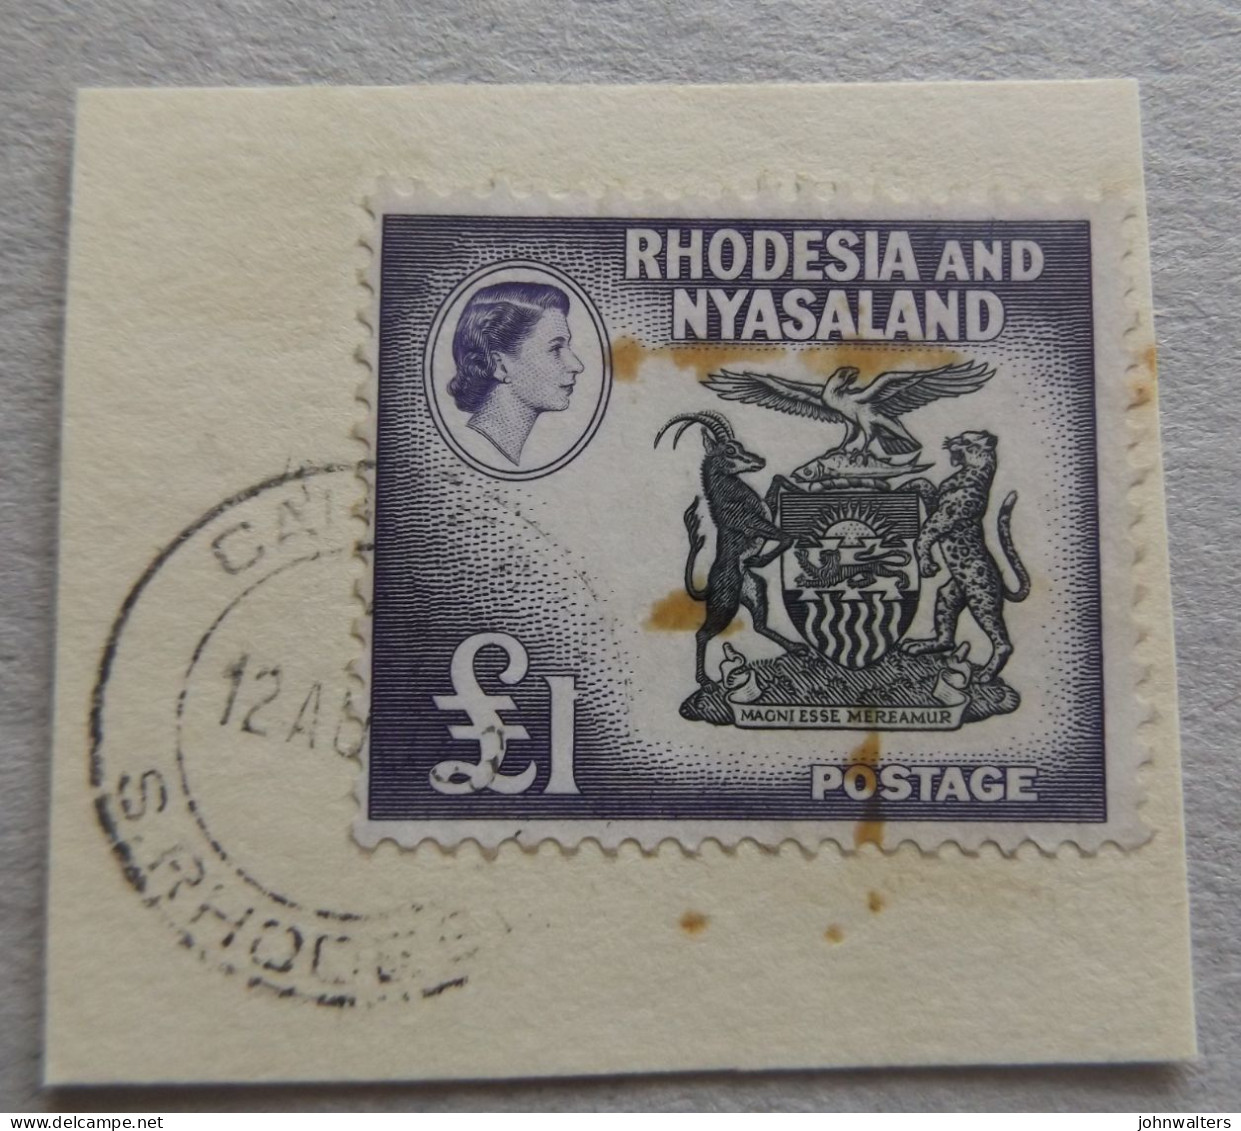 1959 Rhodesia & Nyasaland £1 Definitive Used On Piece Postmarked 12 Aug ( Day If Issue ) Stains - Rhodesië & Nyasaland (1954-1963)